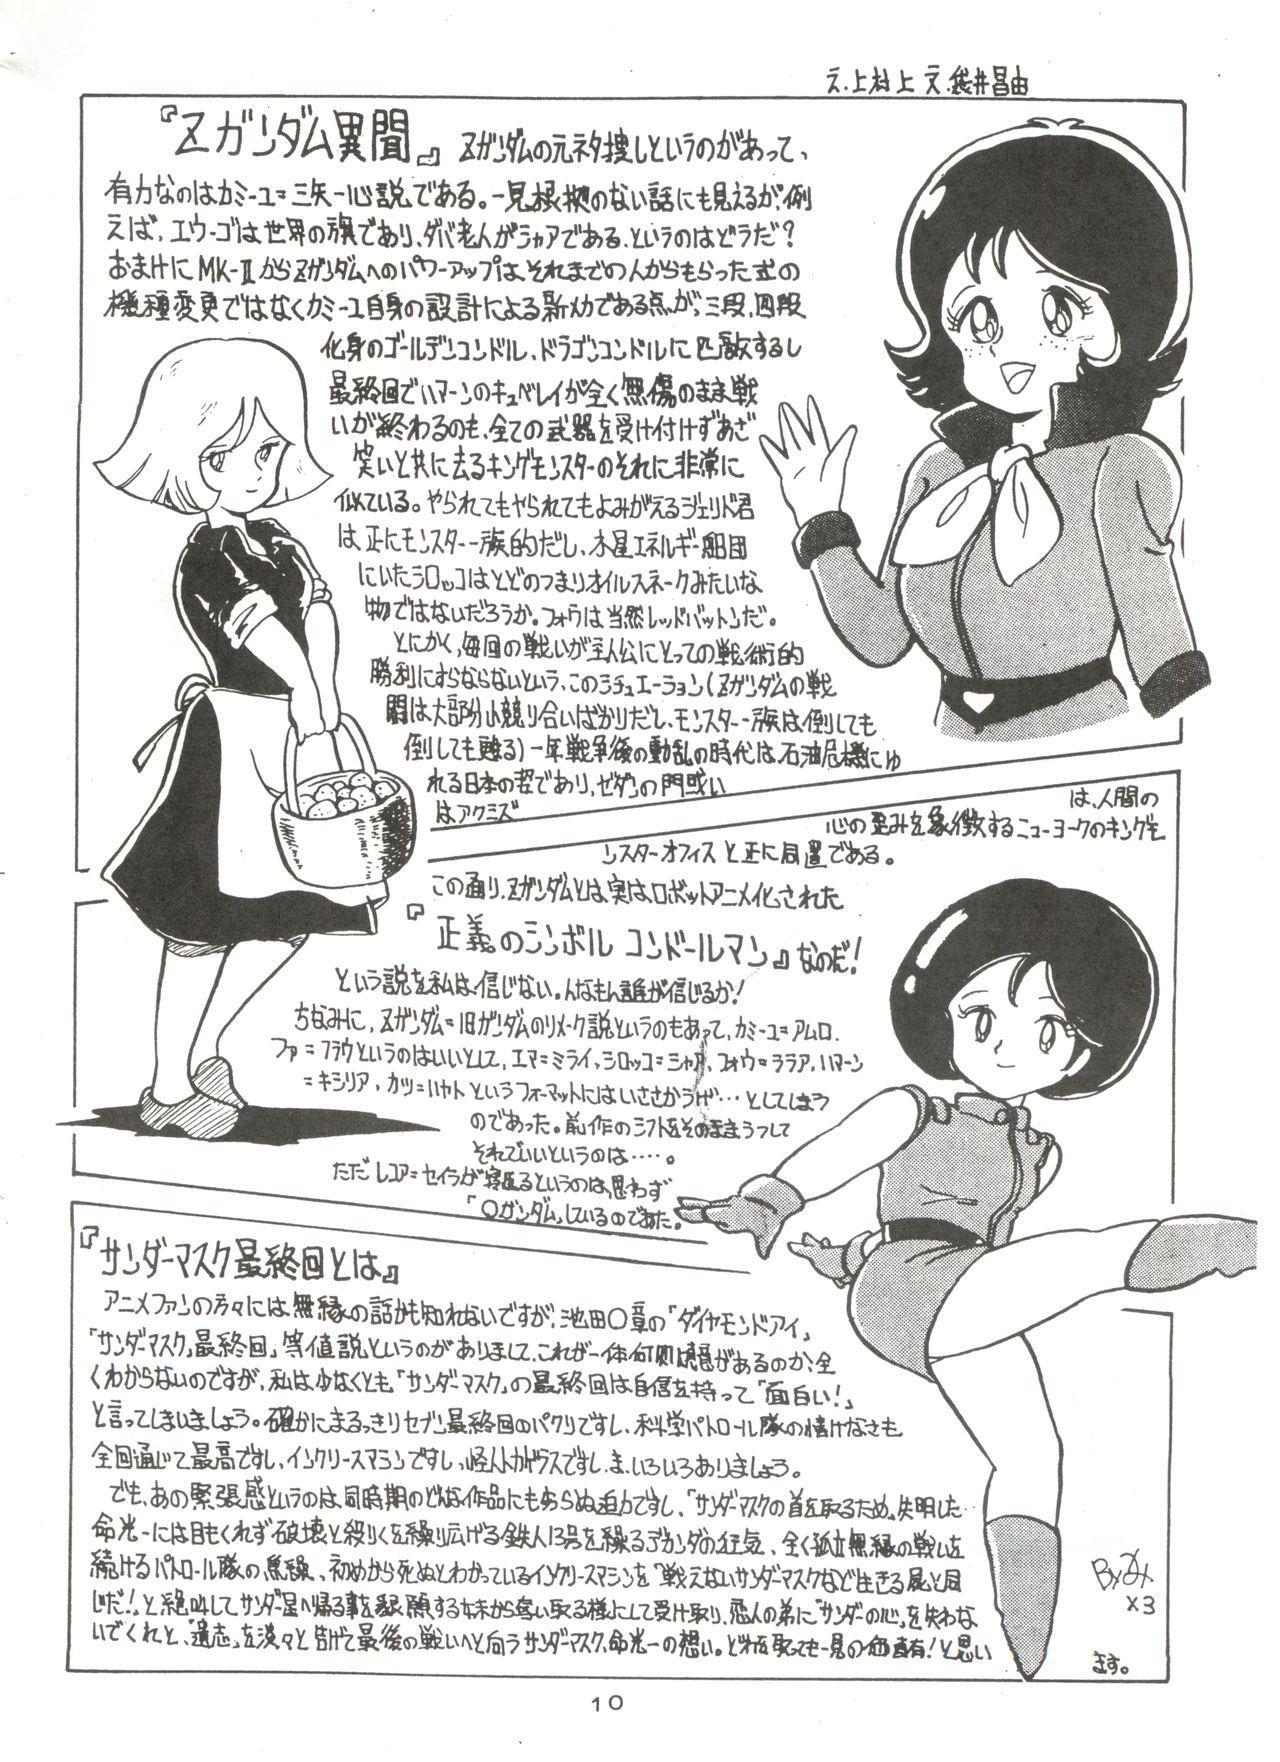 Awesome Look Out 3R - Maison ikkoku Magical emi Gundam zz The super dimension fortress macross Gay Friend - Page 10